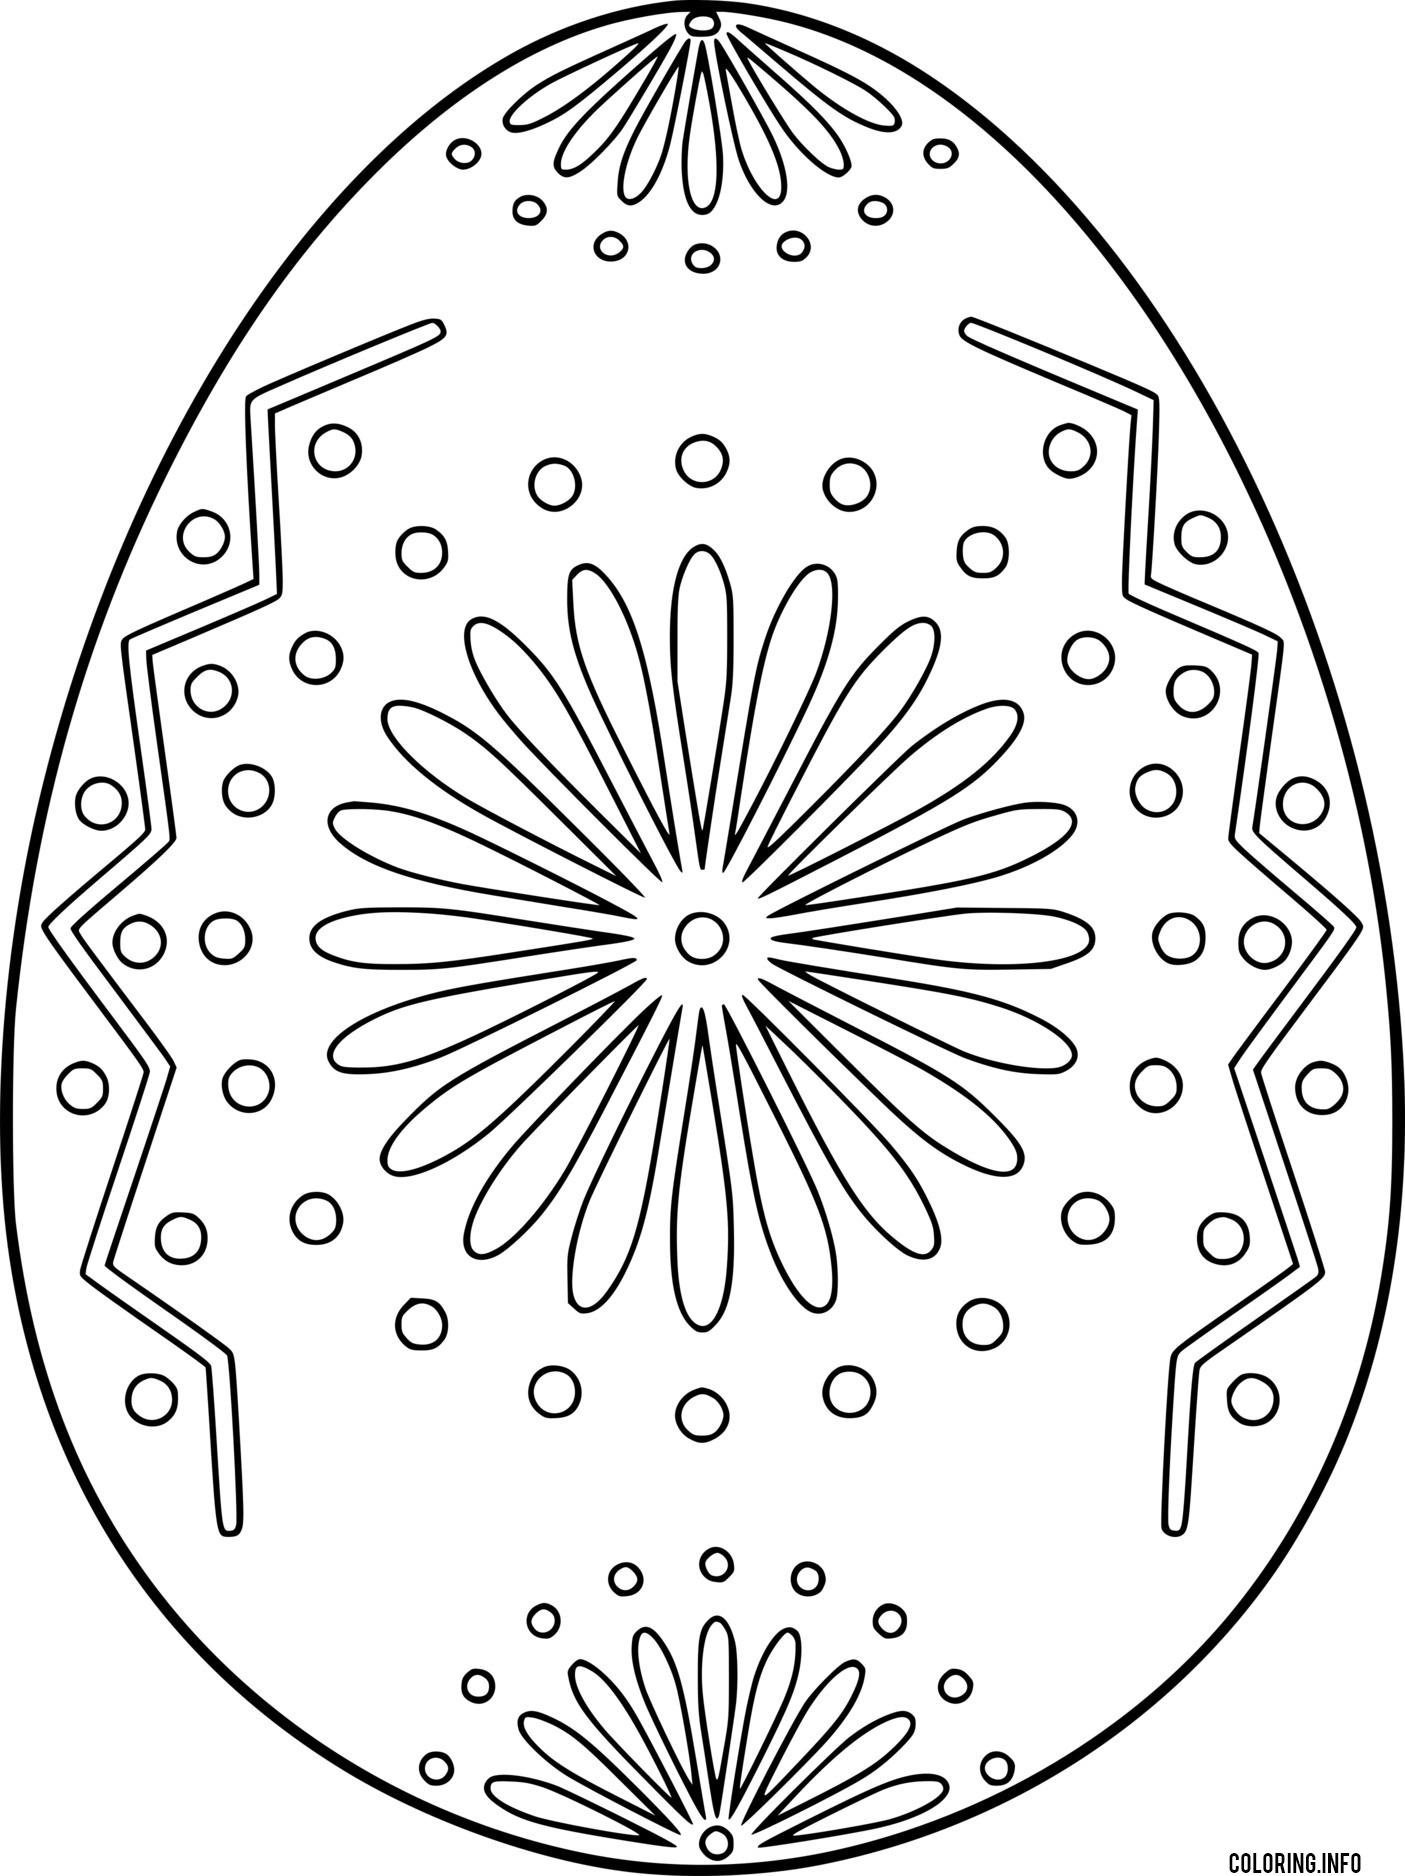 Easter Egg With Symmetrical Flowers coloring